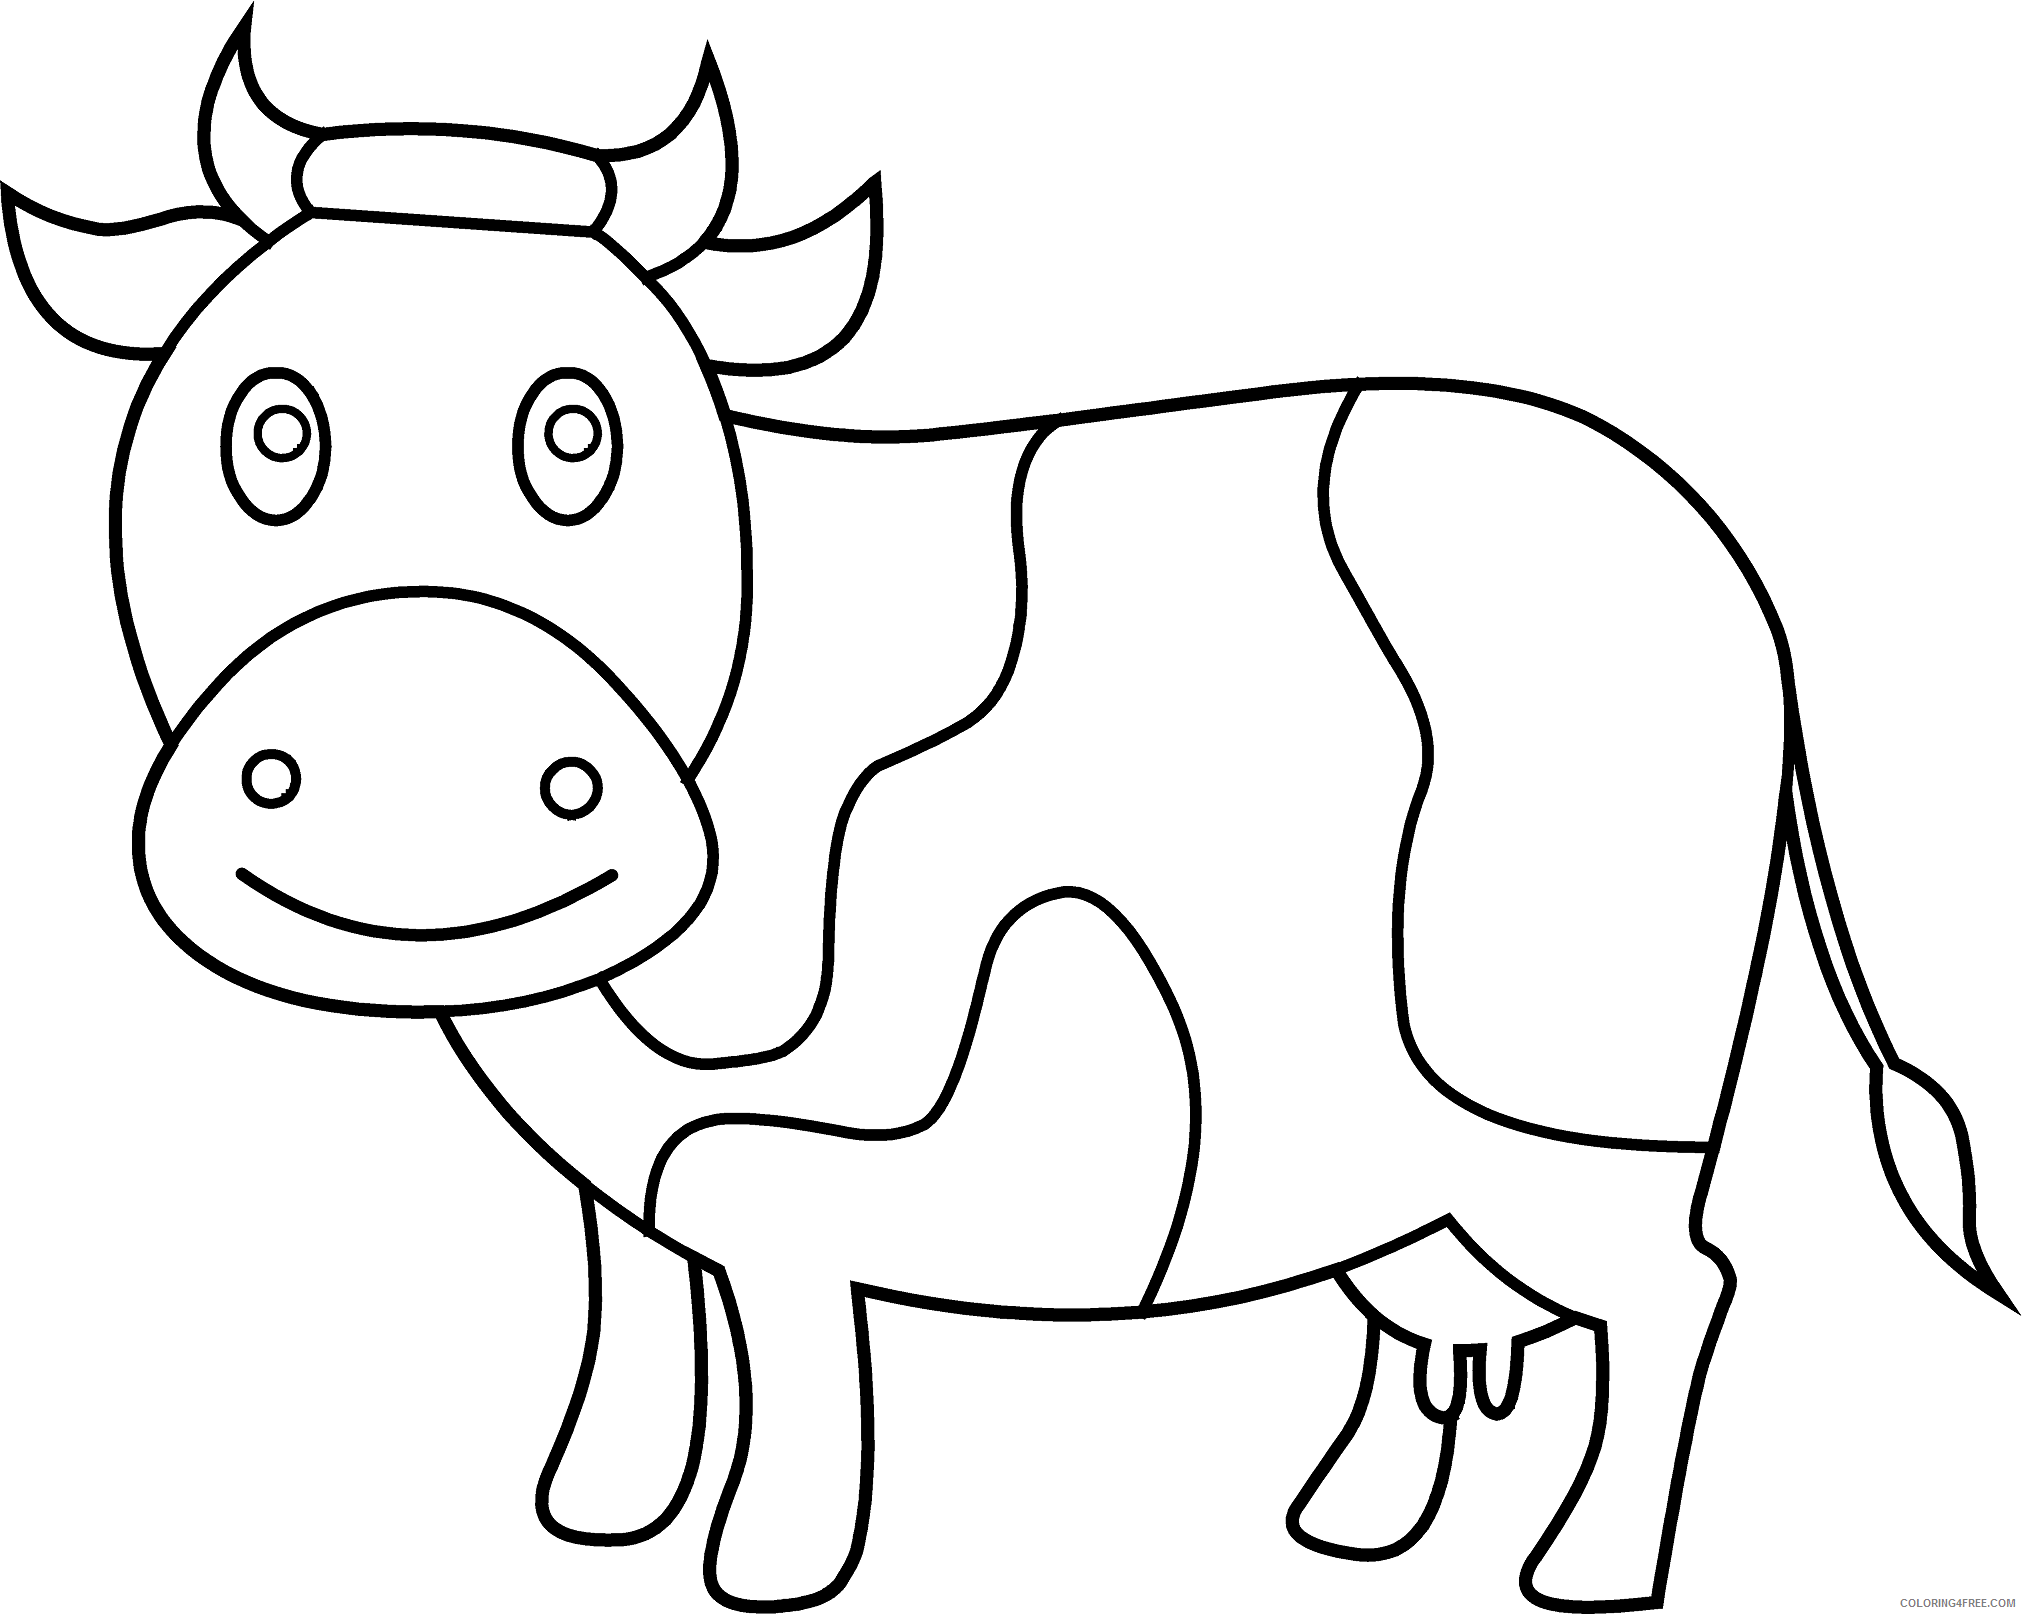 Black and White Cow Coloring Pages gallery for andw Printable Coloring4free